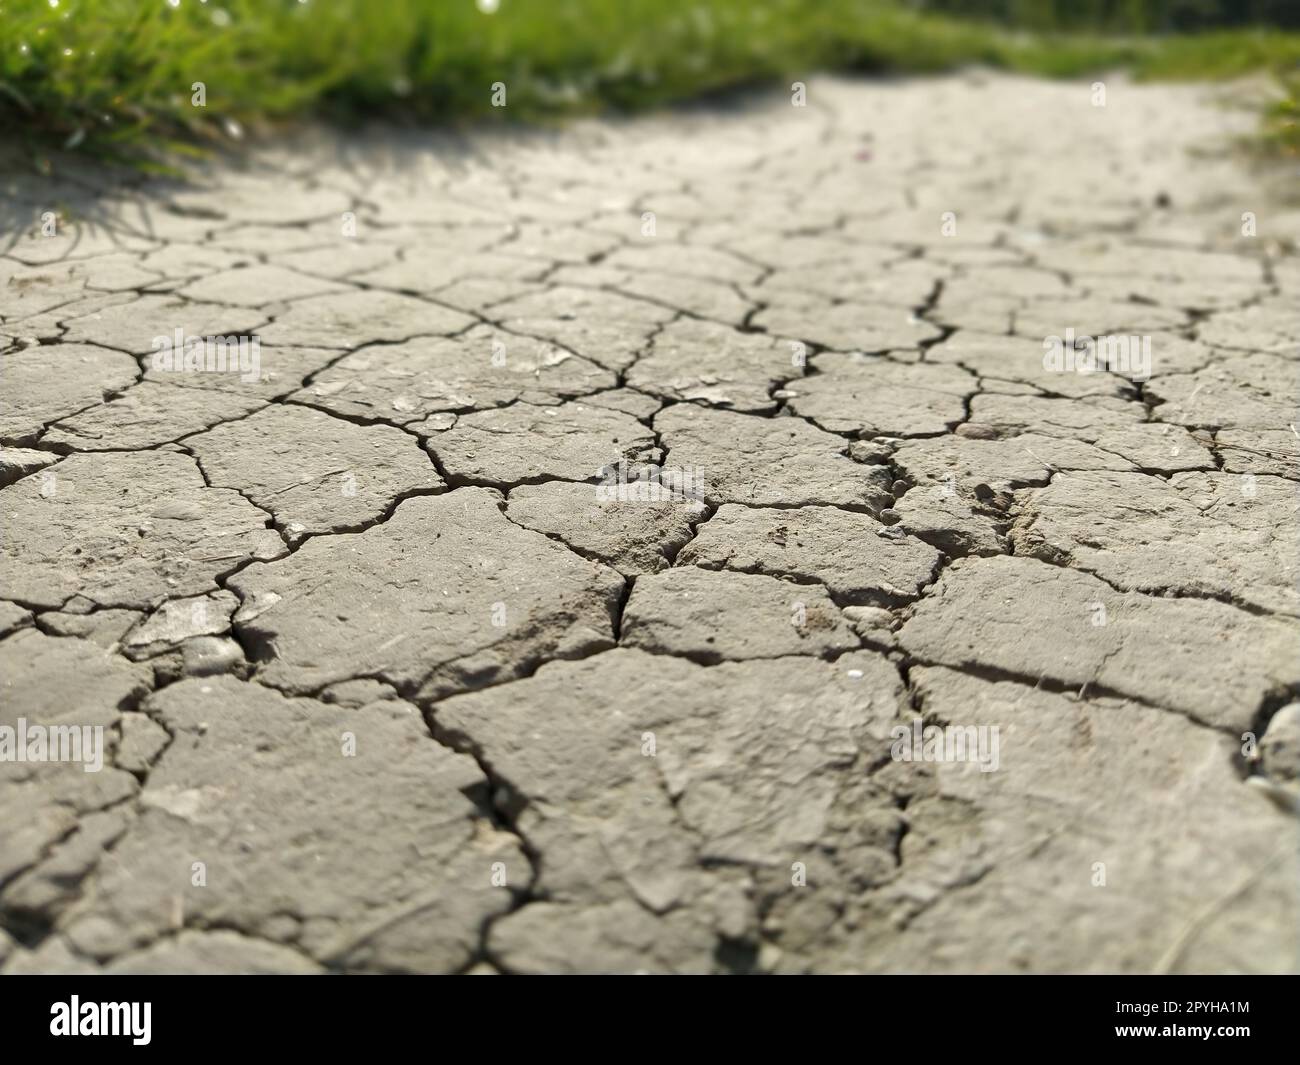 Cracked Sidewalk in Urban Area. Cracked dirt road with cracks in the clay structure of the soil. On the sides of the photograph are defocused green plants. Soft focus Stock Photo